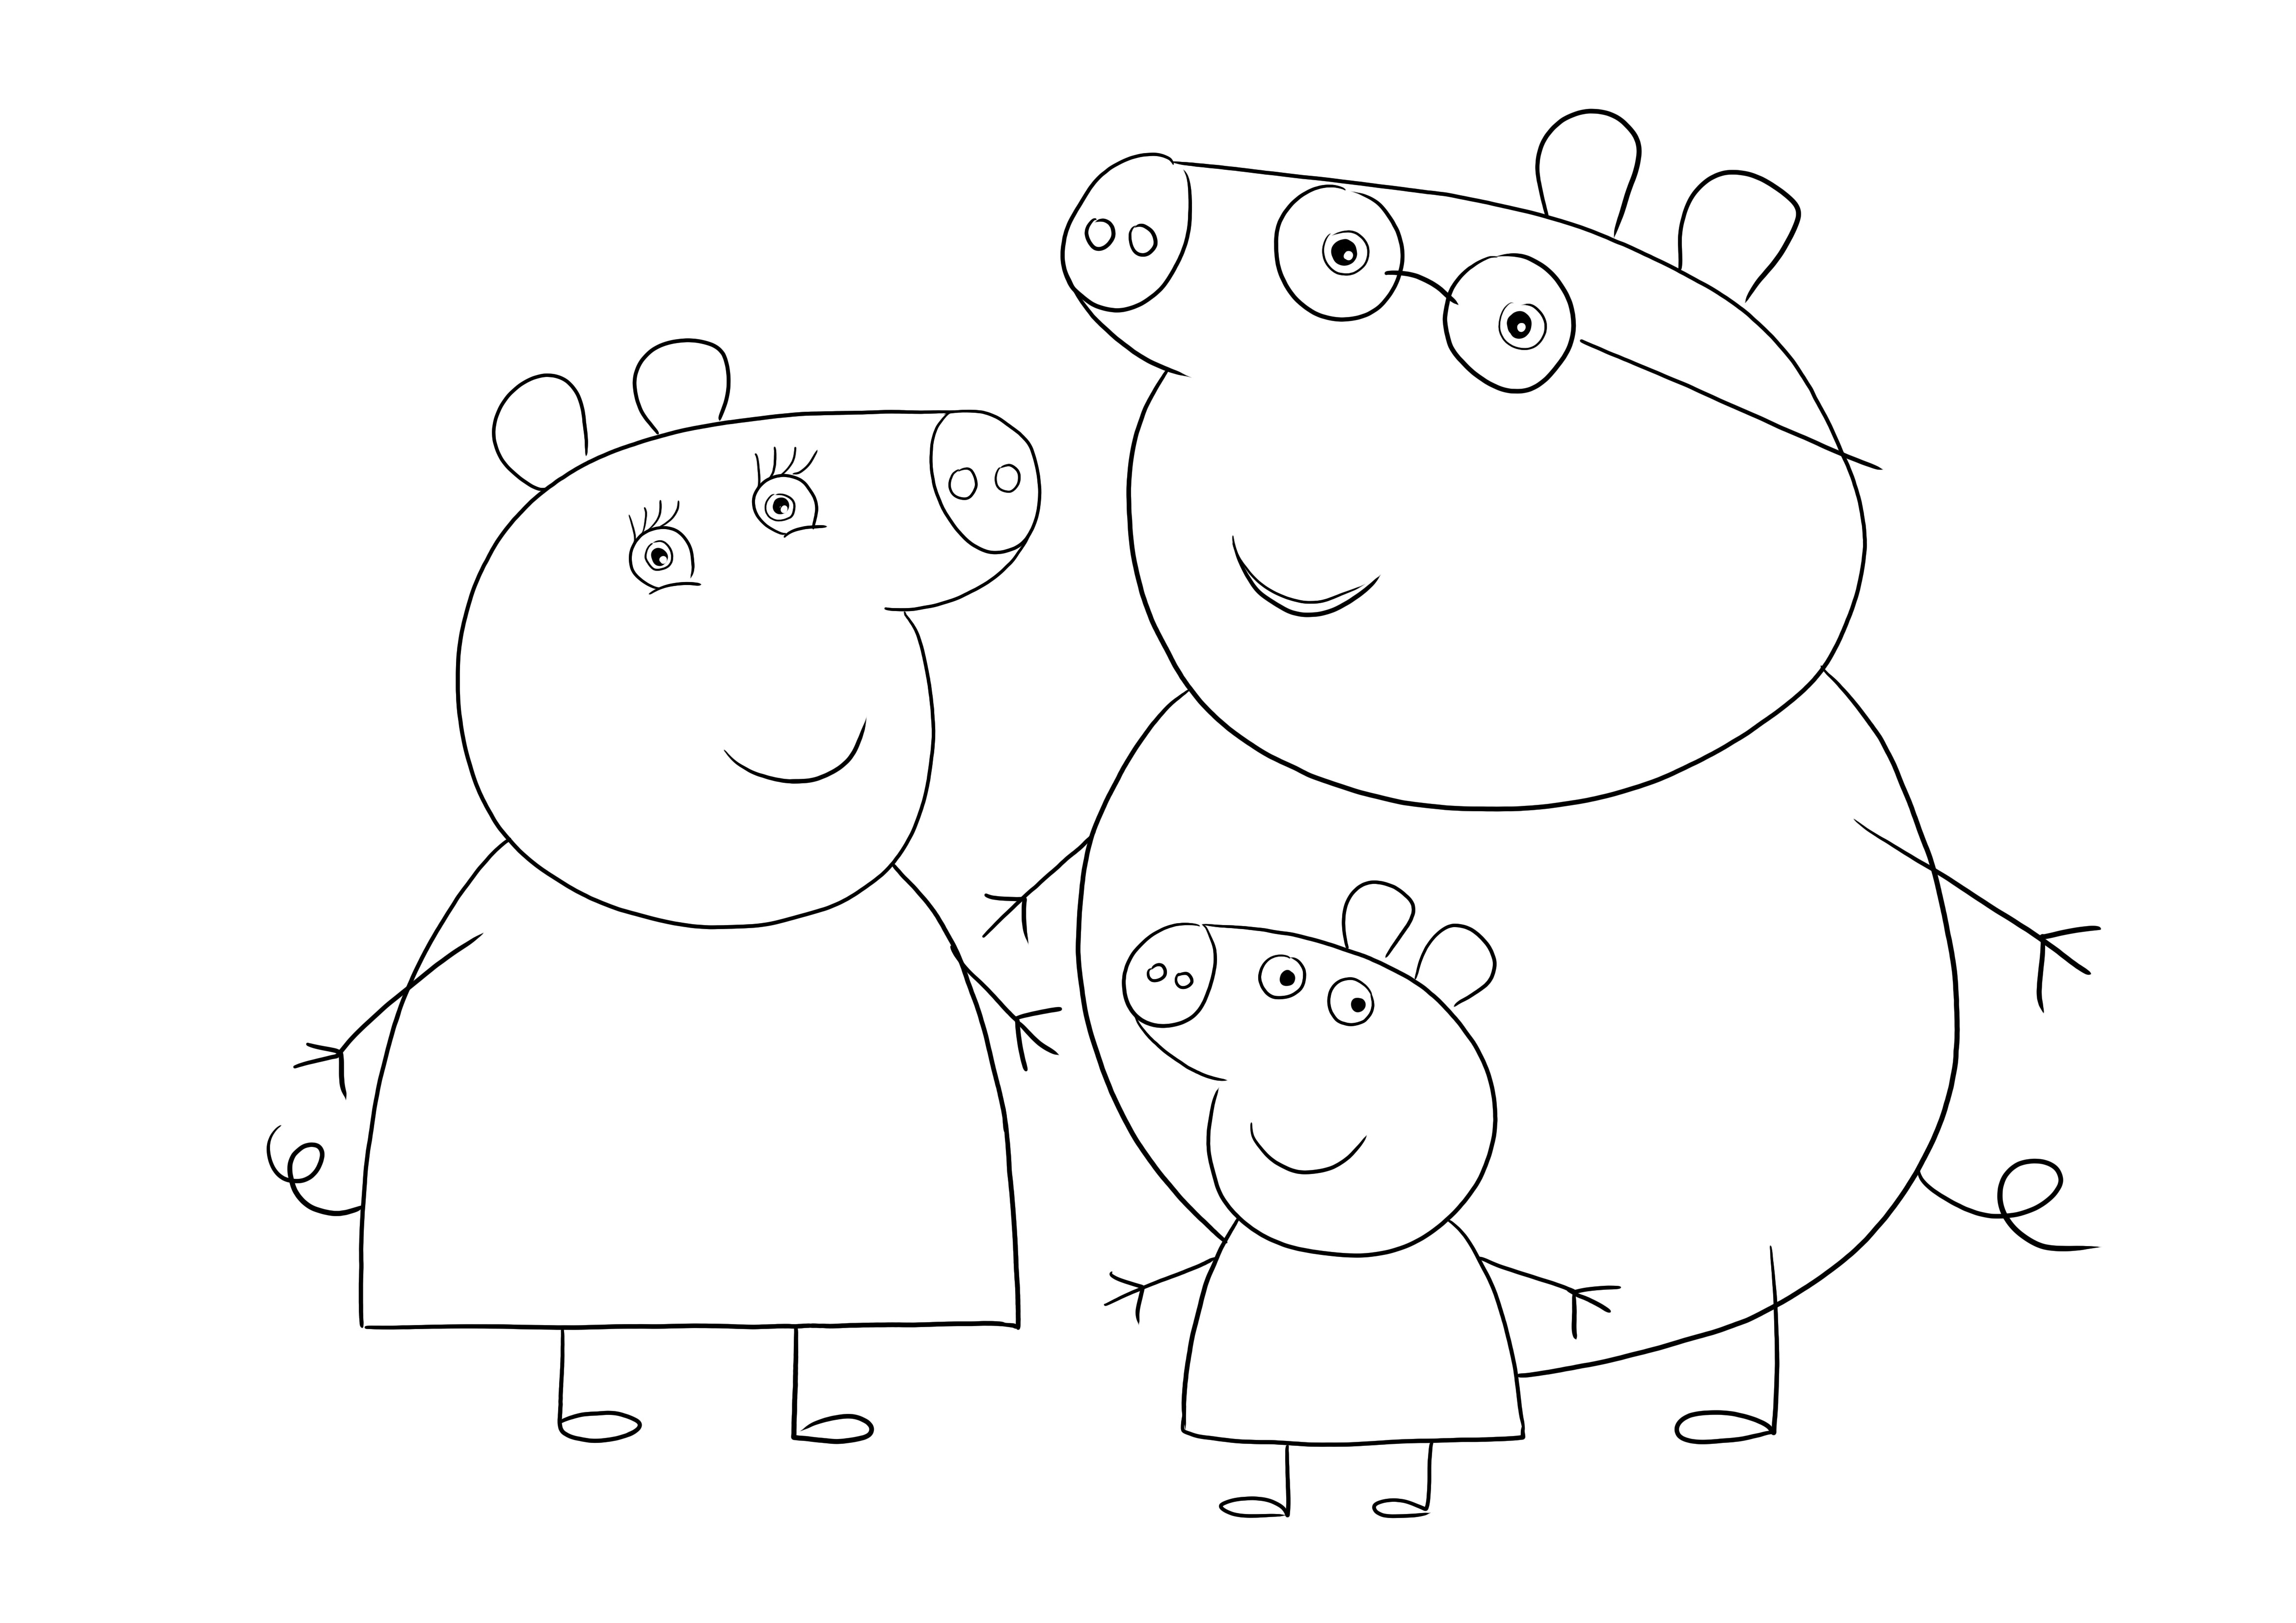 Daddy-Mommy-Peppa pig for free coloring and downloading for kids